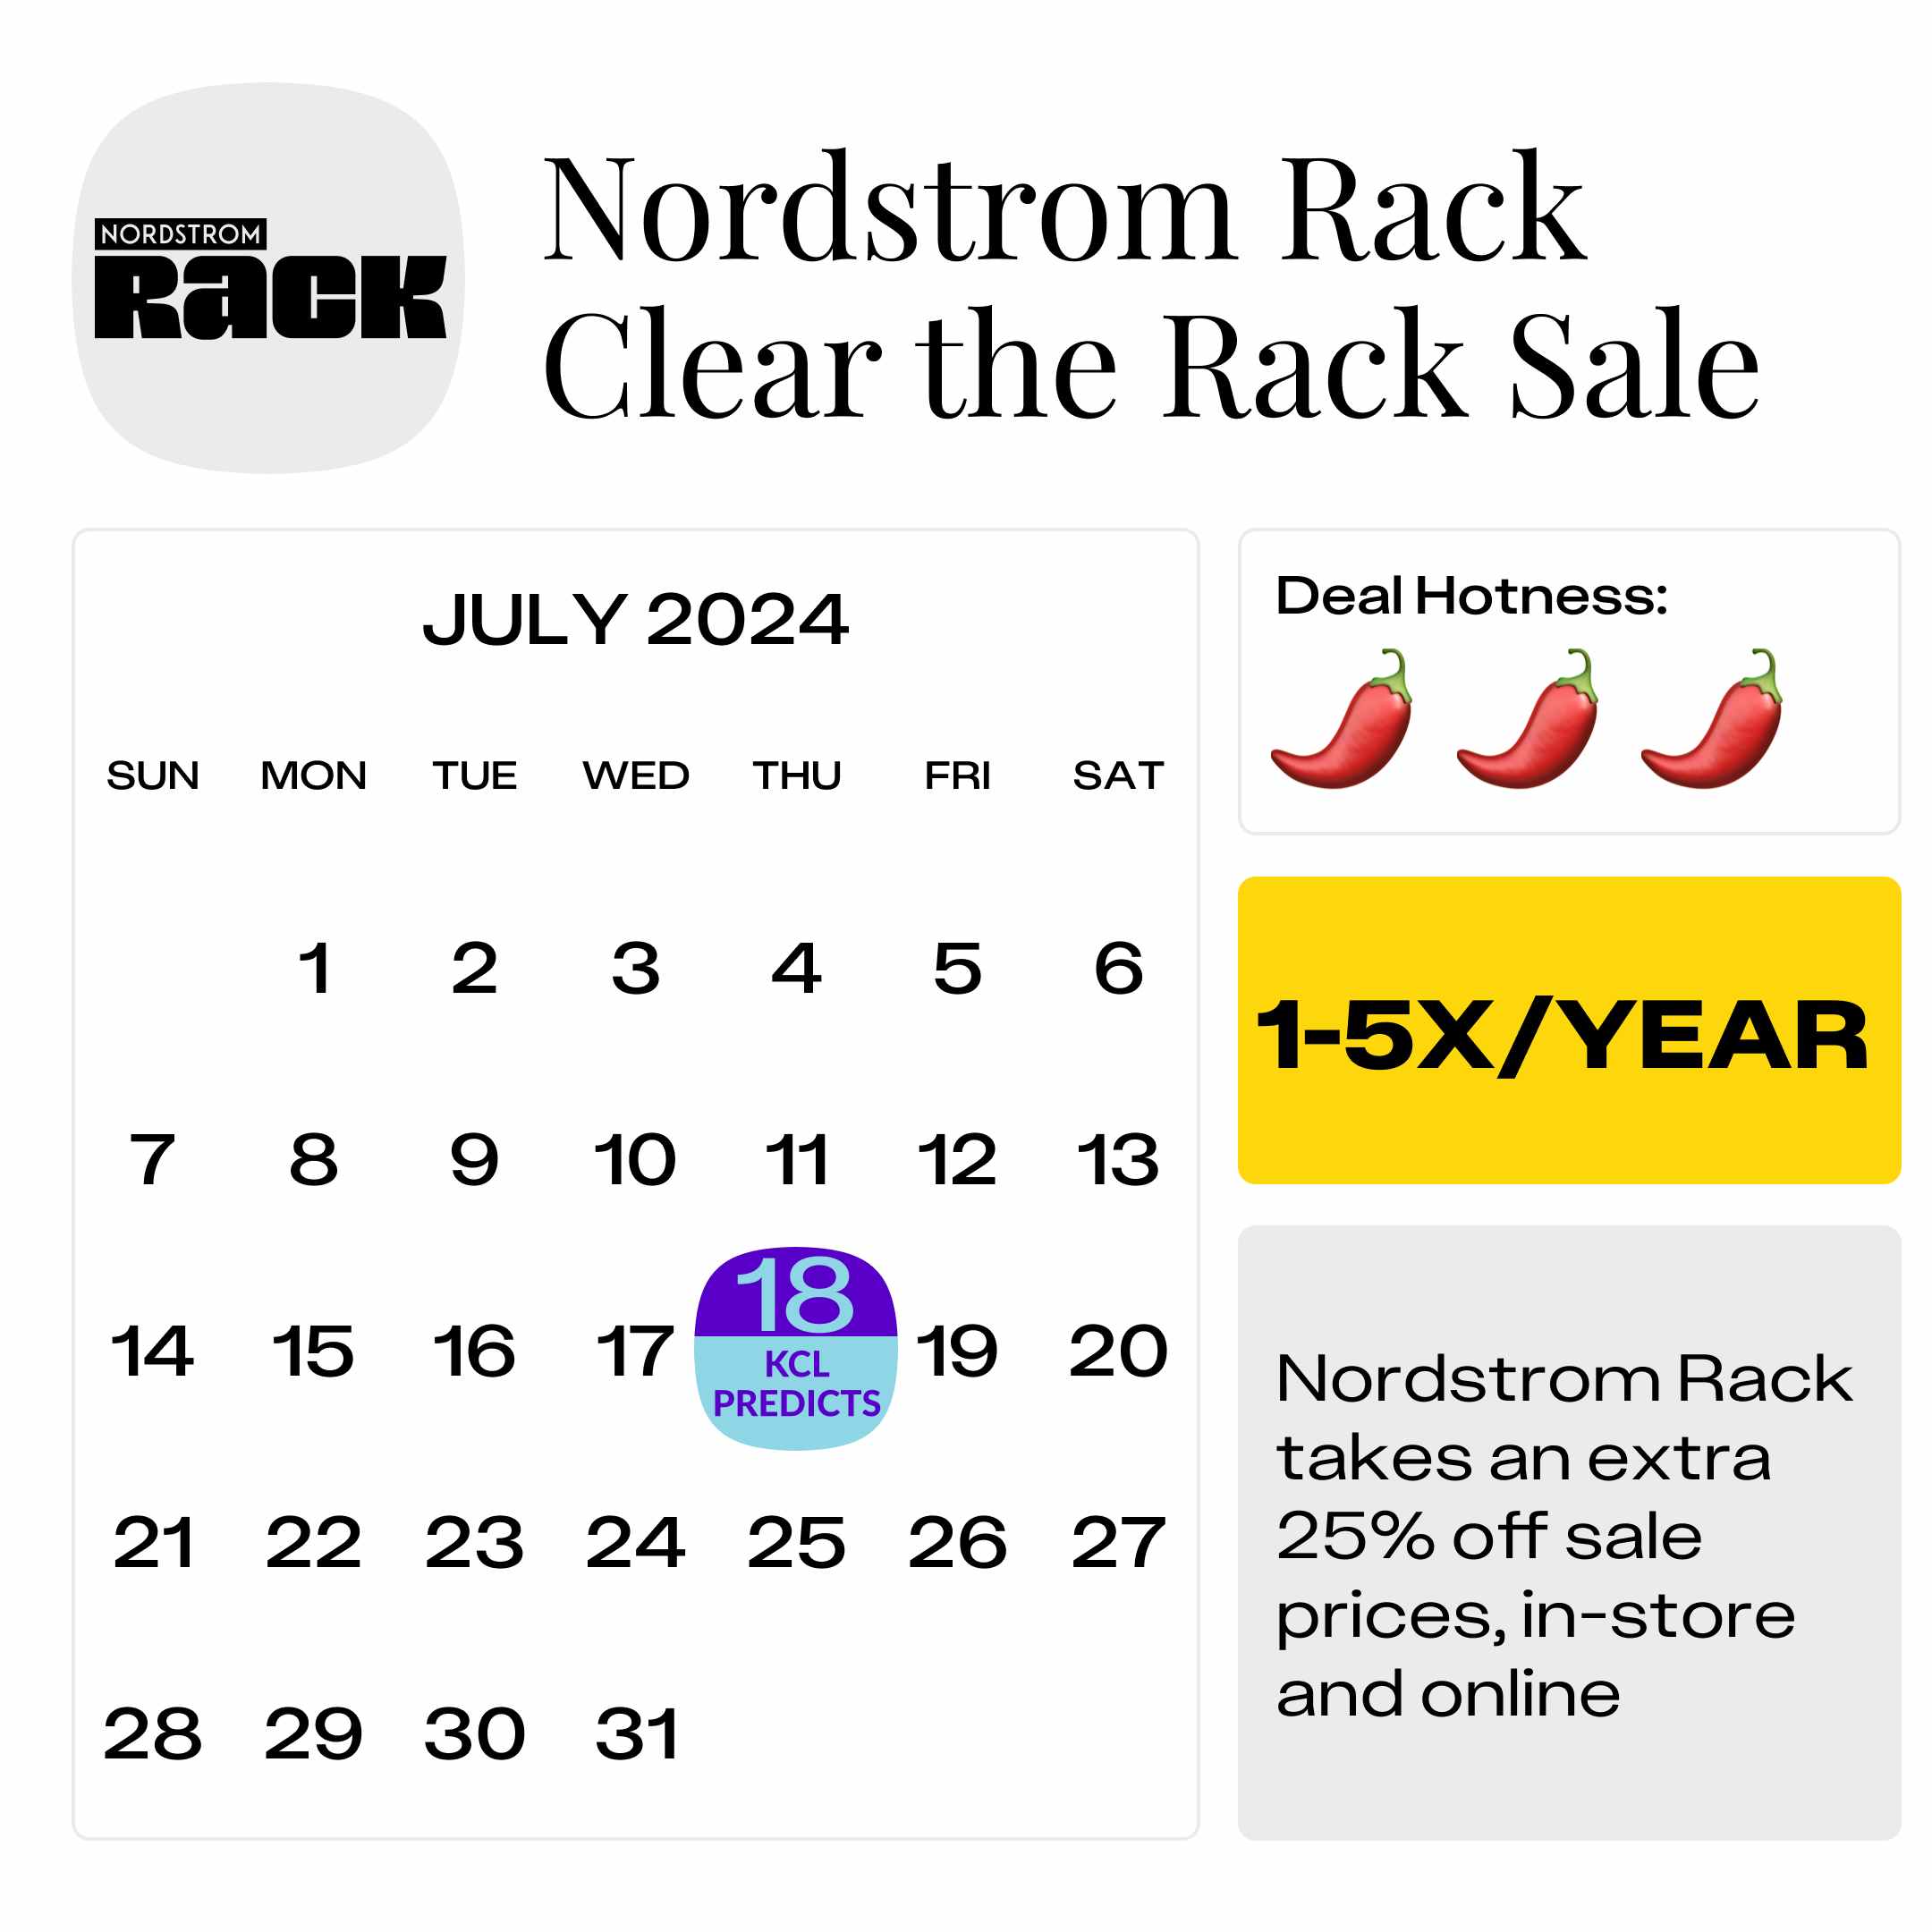 Nordstrom-Rack-Clear-the-Rack-Sale